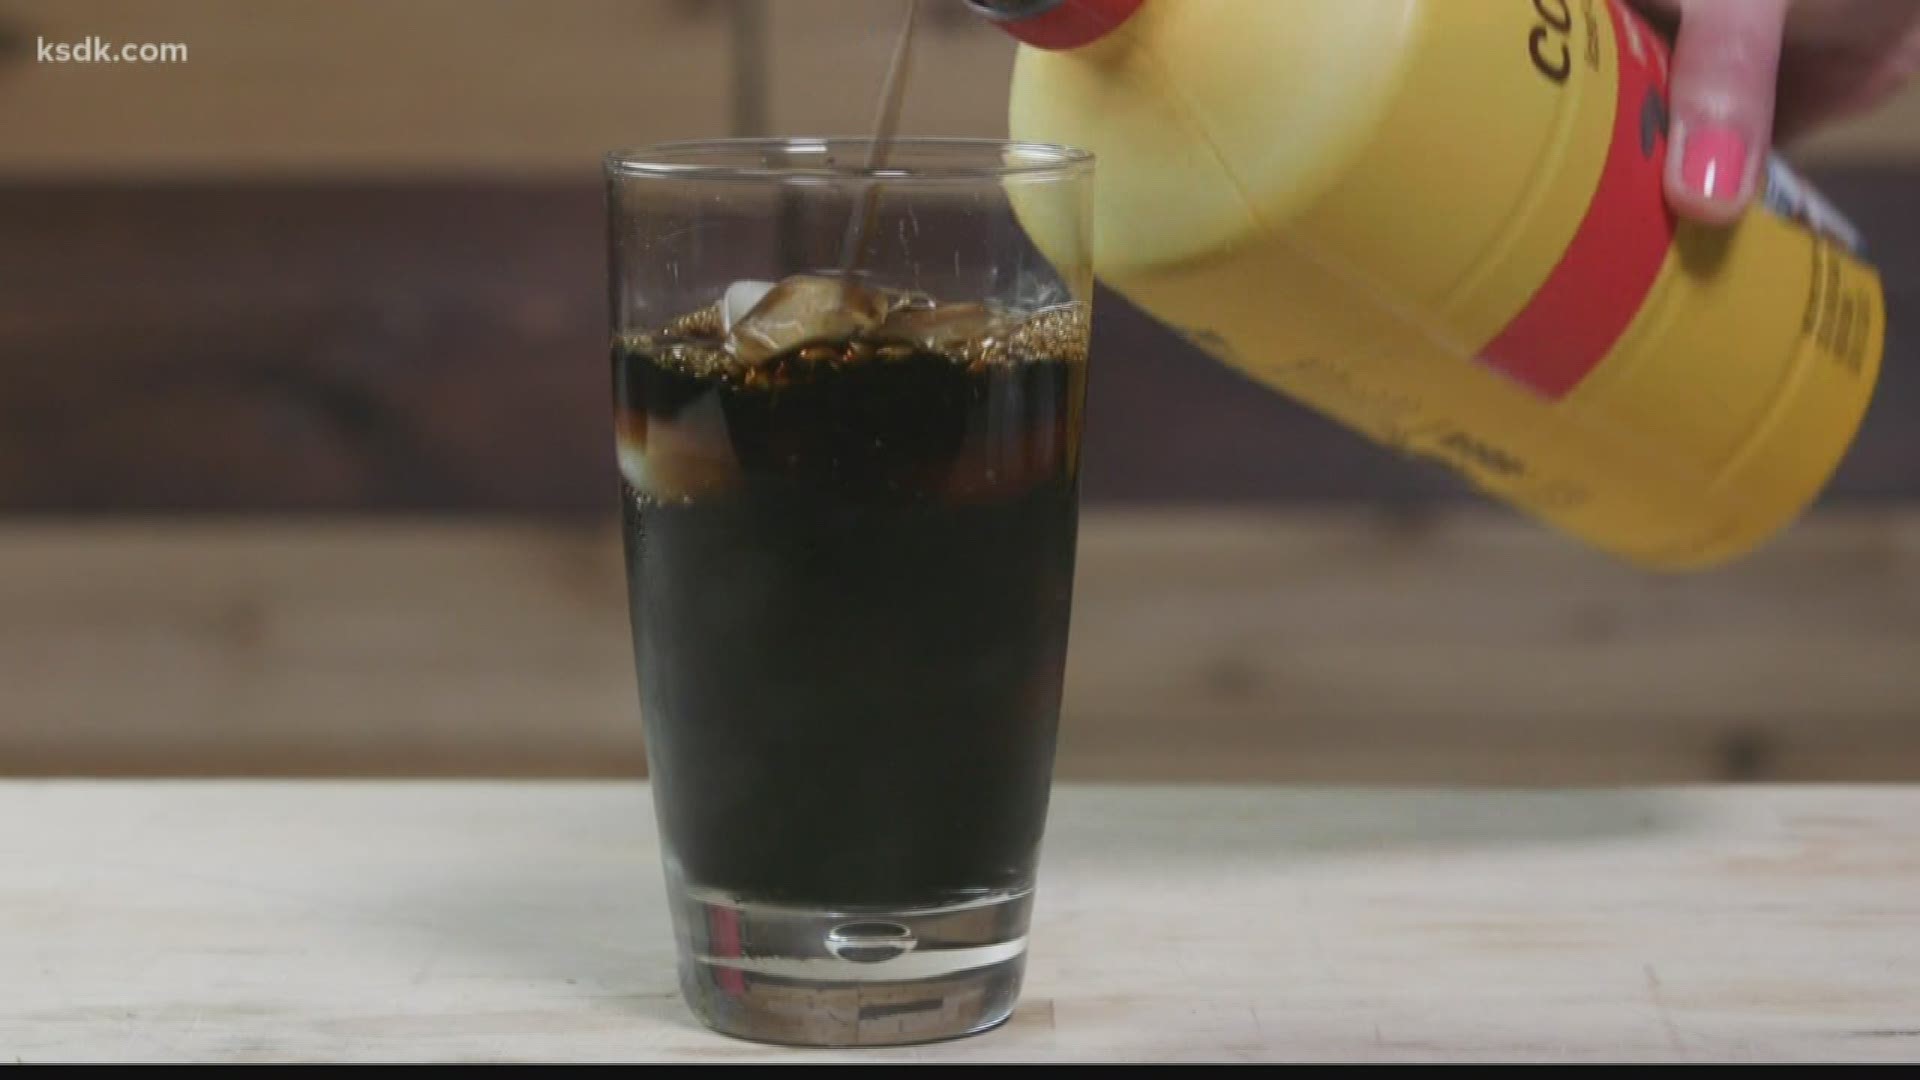 Consumer Reports says when it comes to cold brew coffee, read the labels.